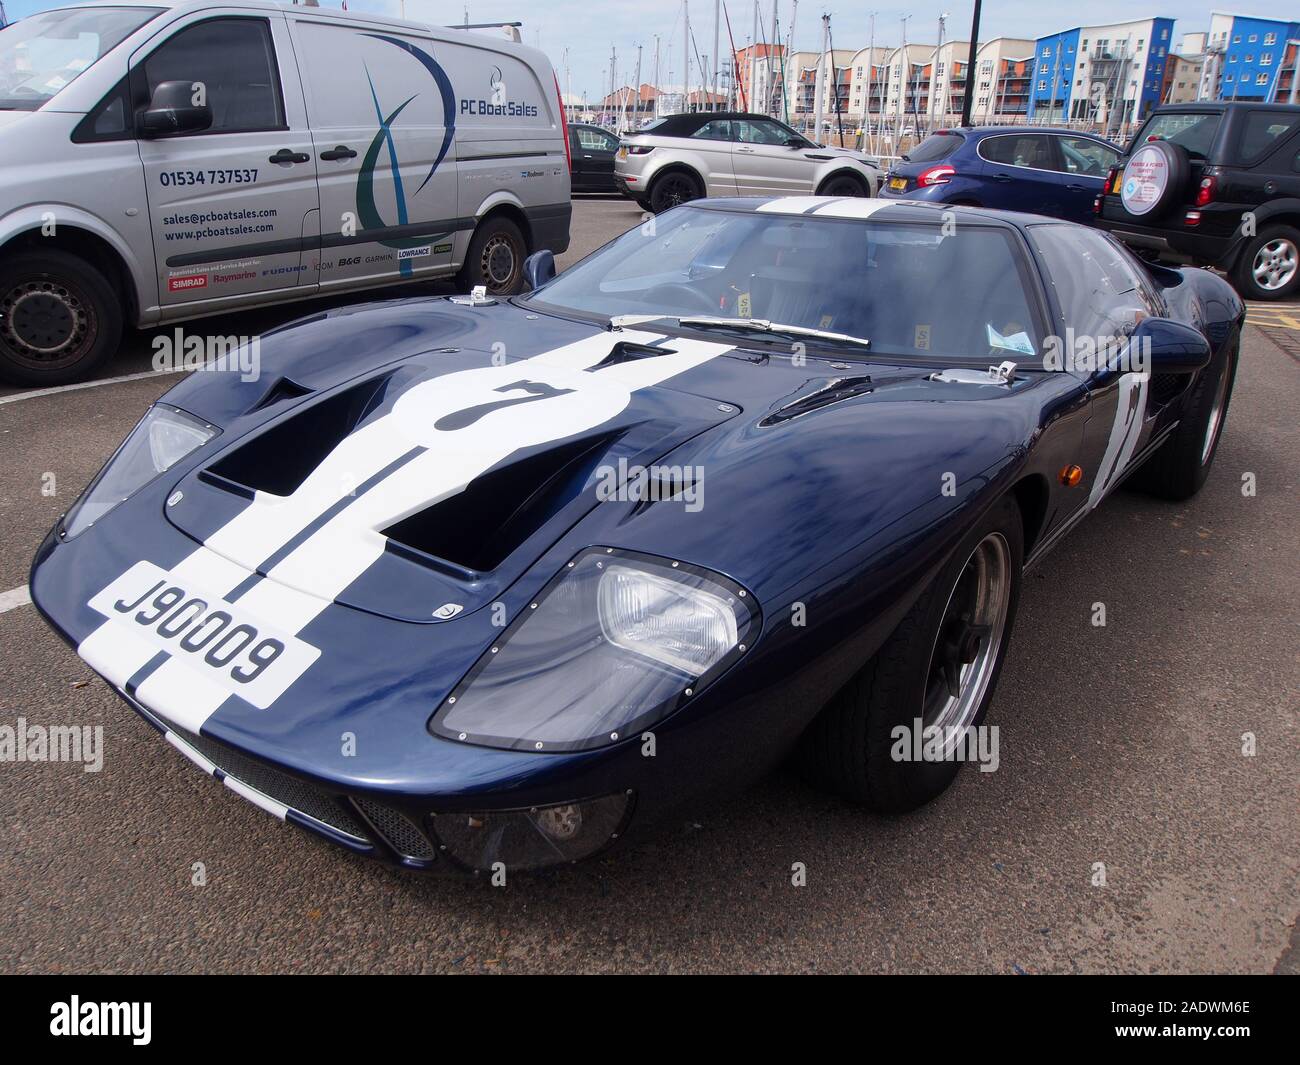 Page 2 - Ford gt40 racing car High Resolution Stock Photography and Images  - Alamy